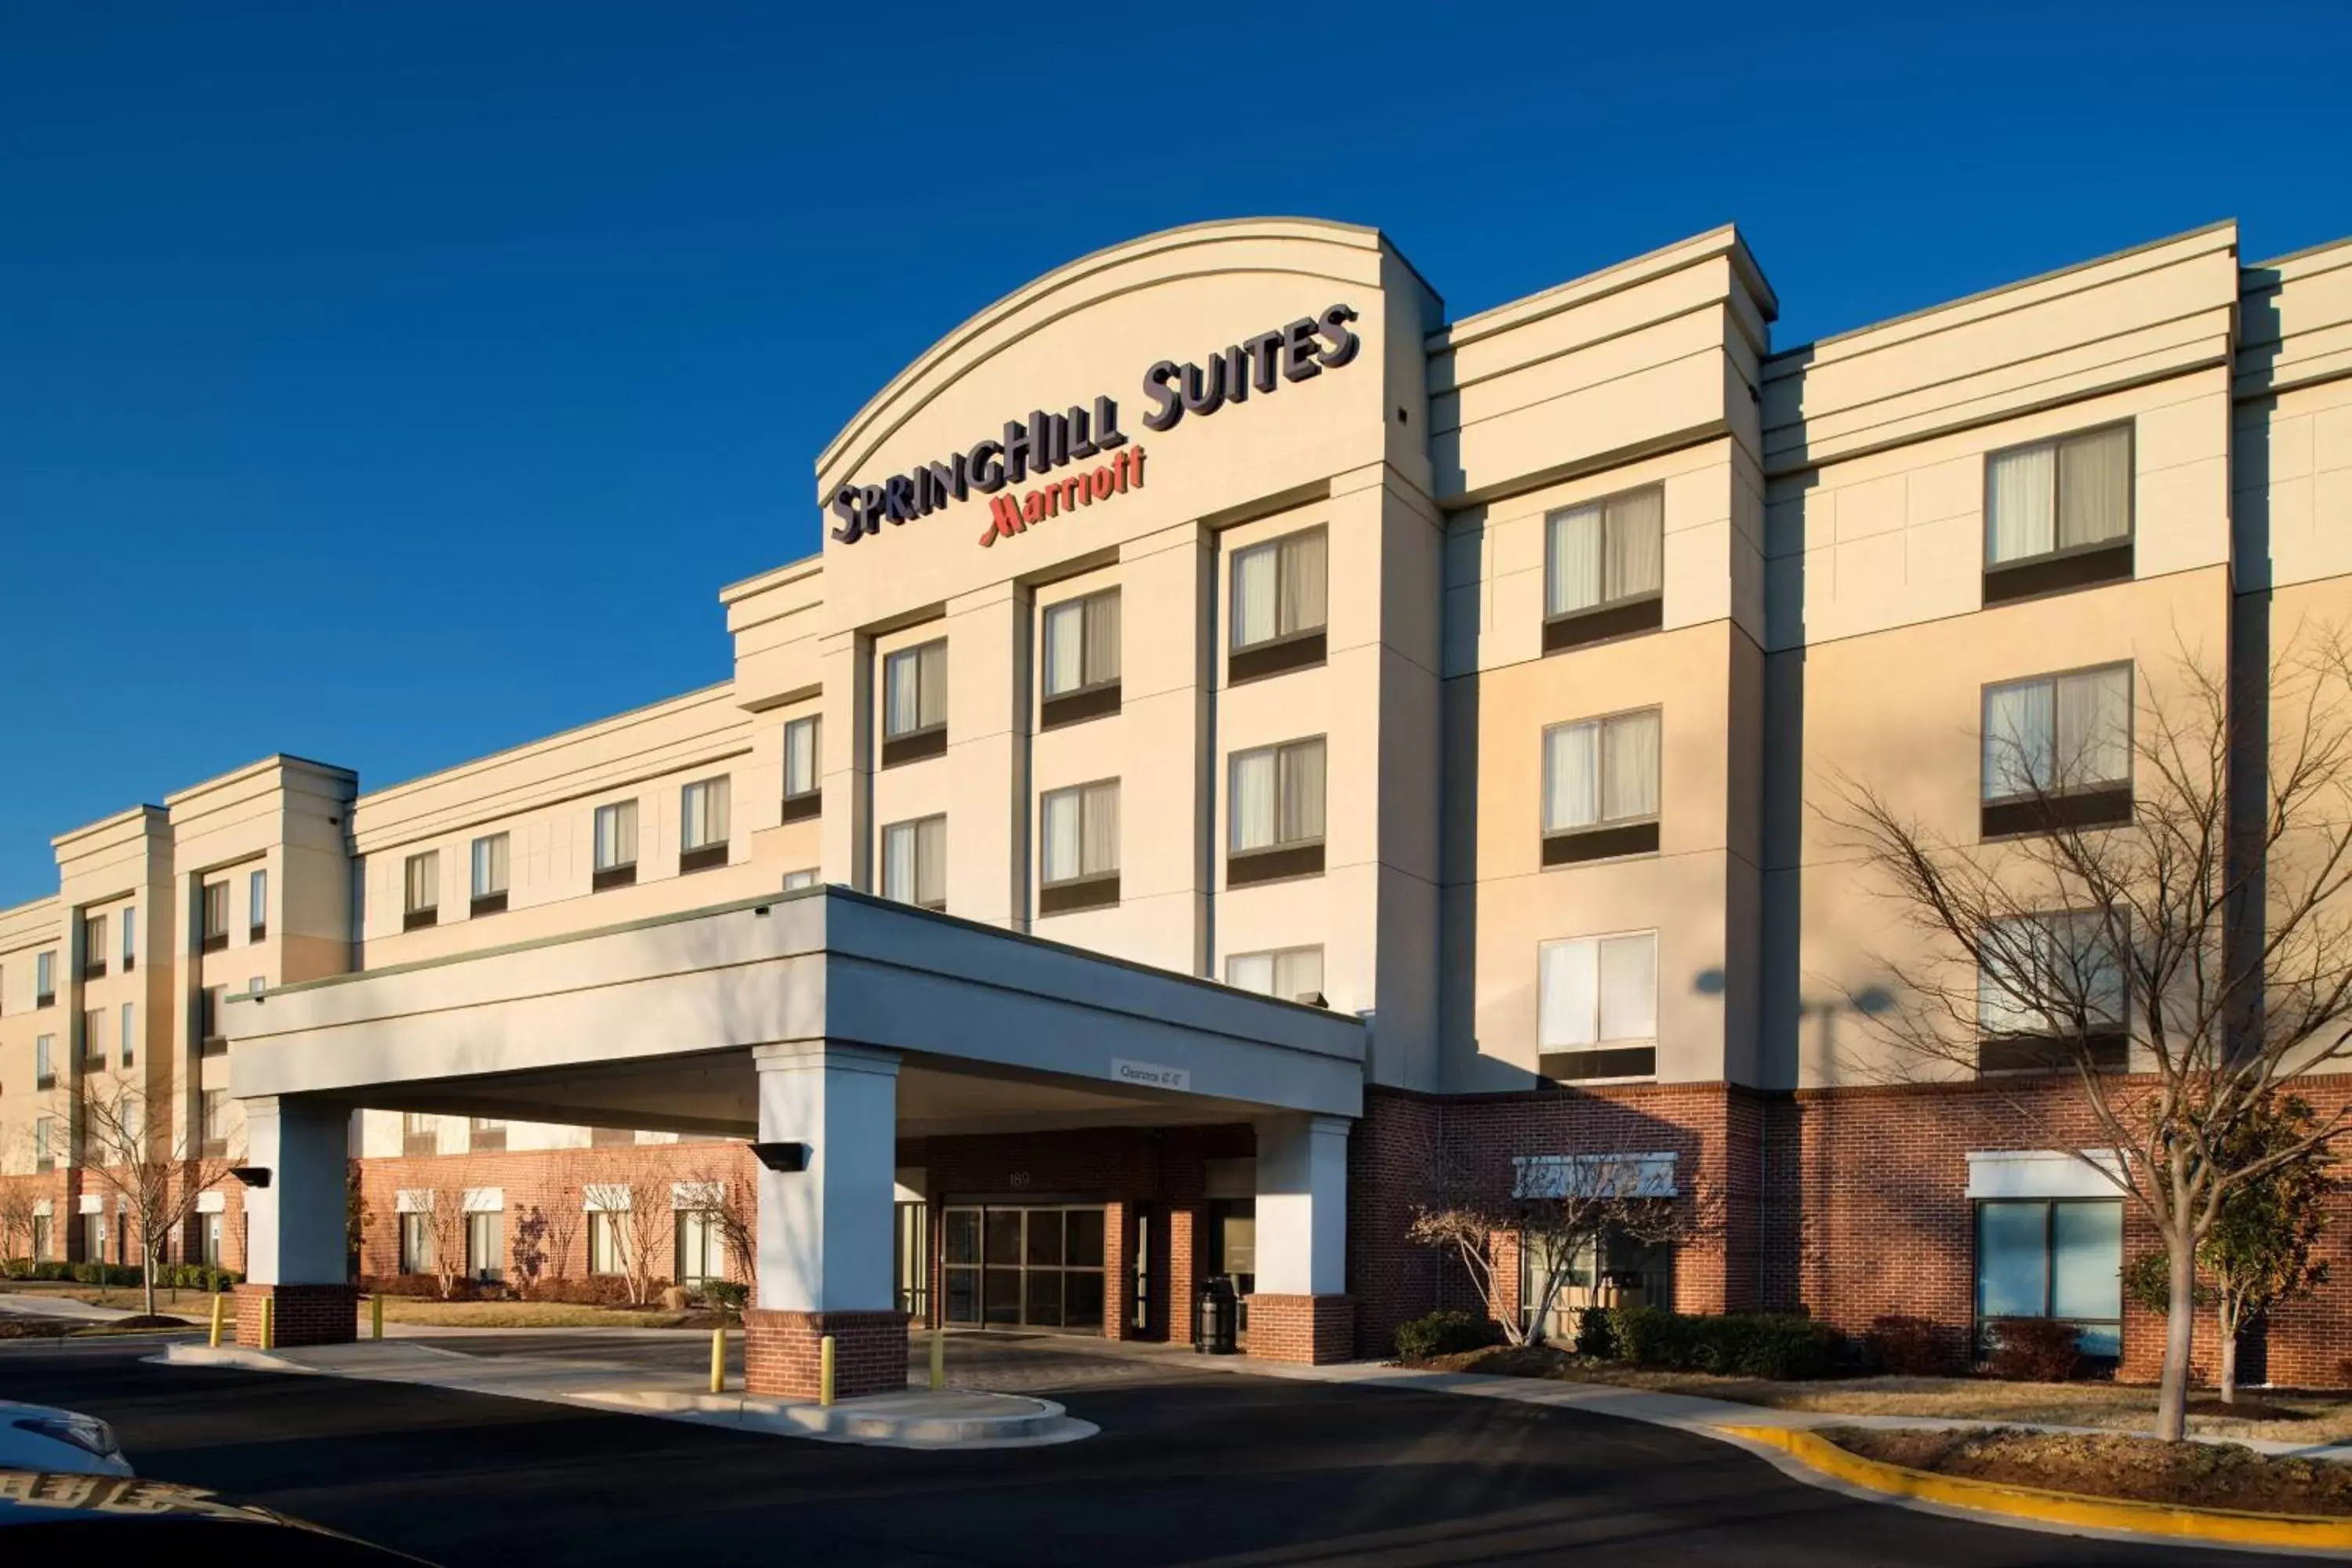 Property Building in SpringHill Suites by Marriott Annapolis